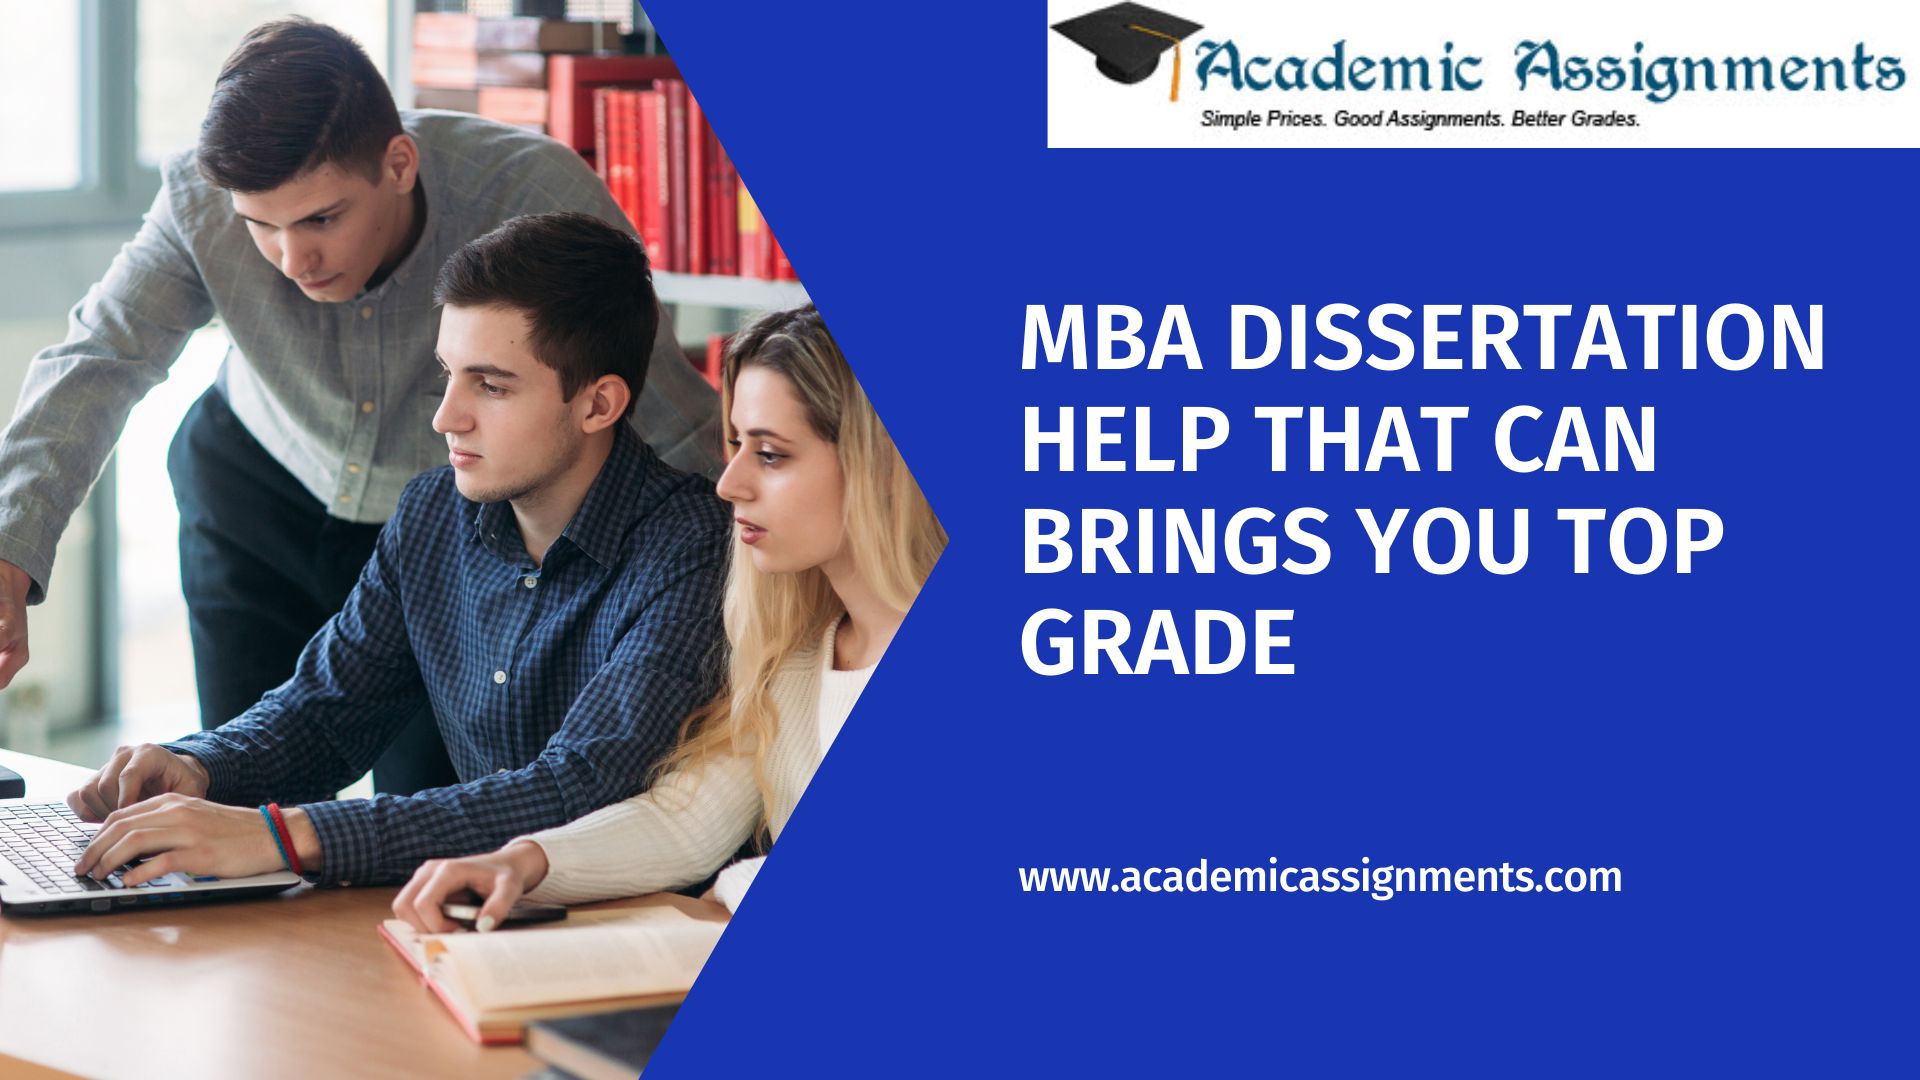 MBA DISSERTATION HELP THAT CAN BRINGS YOU TOP GRADE